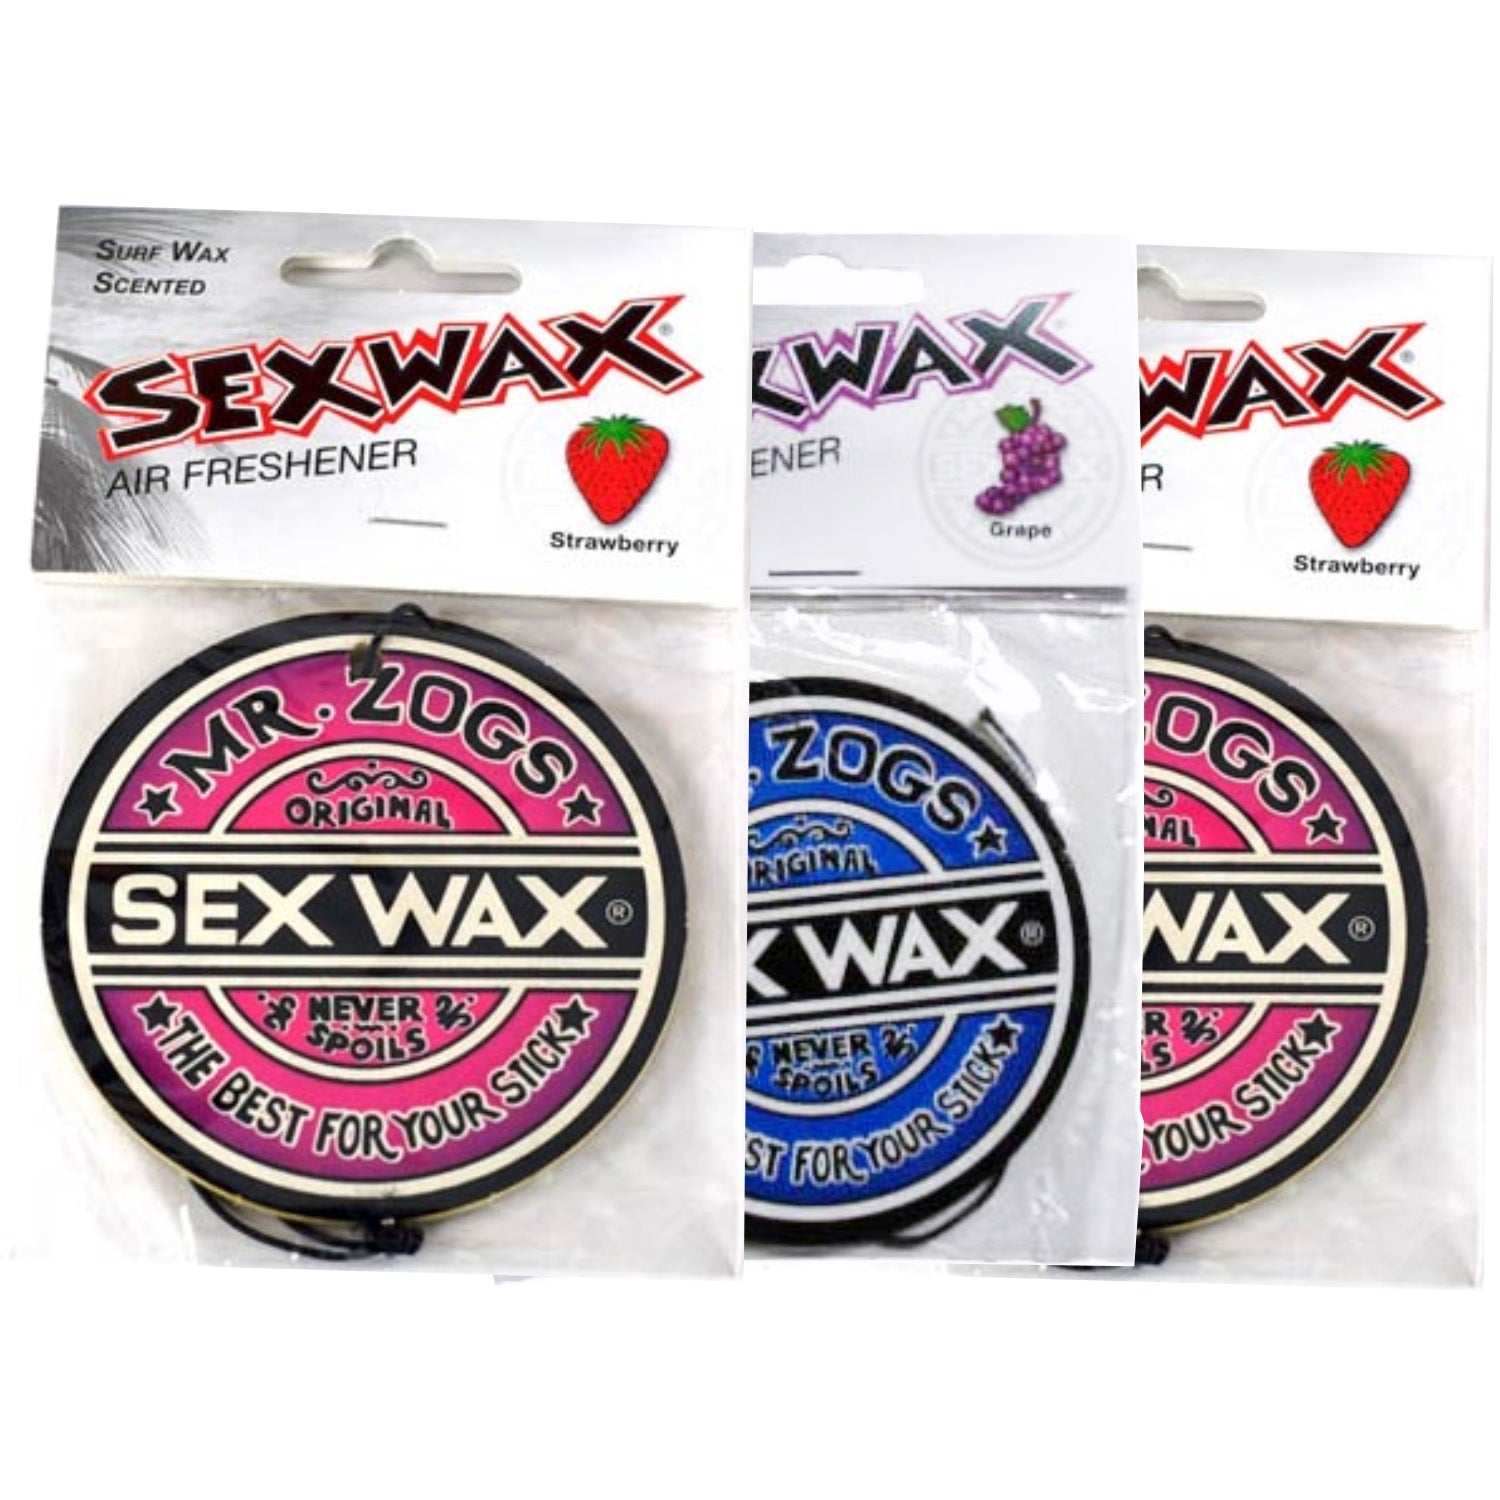 SHOP: Get your car smelling like surf wax. The popular Sex wax car